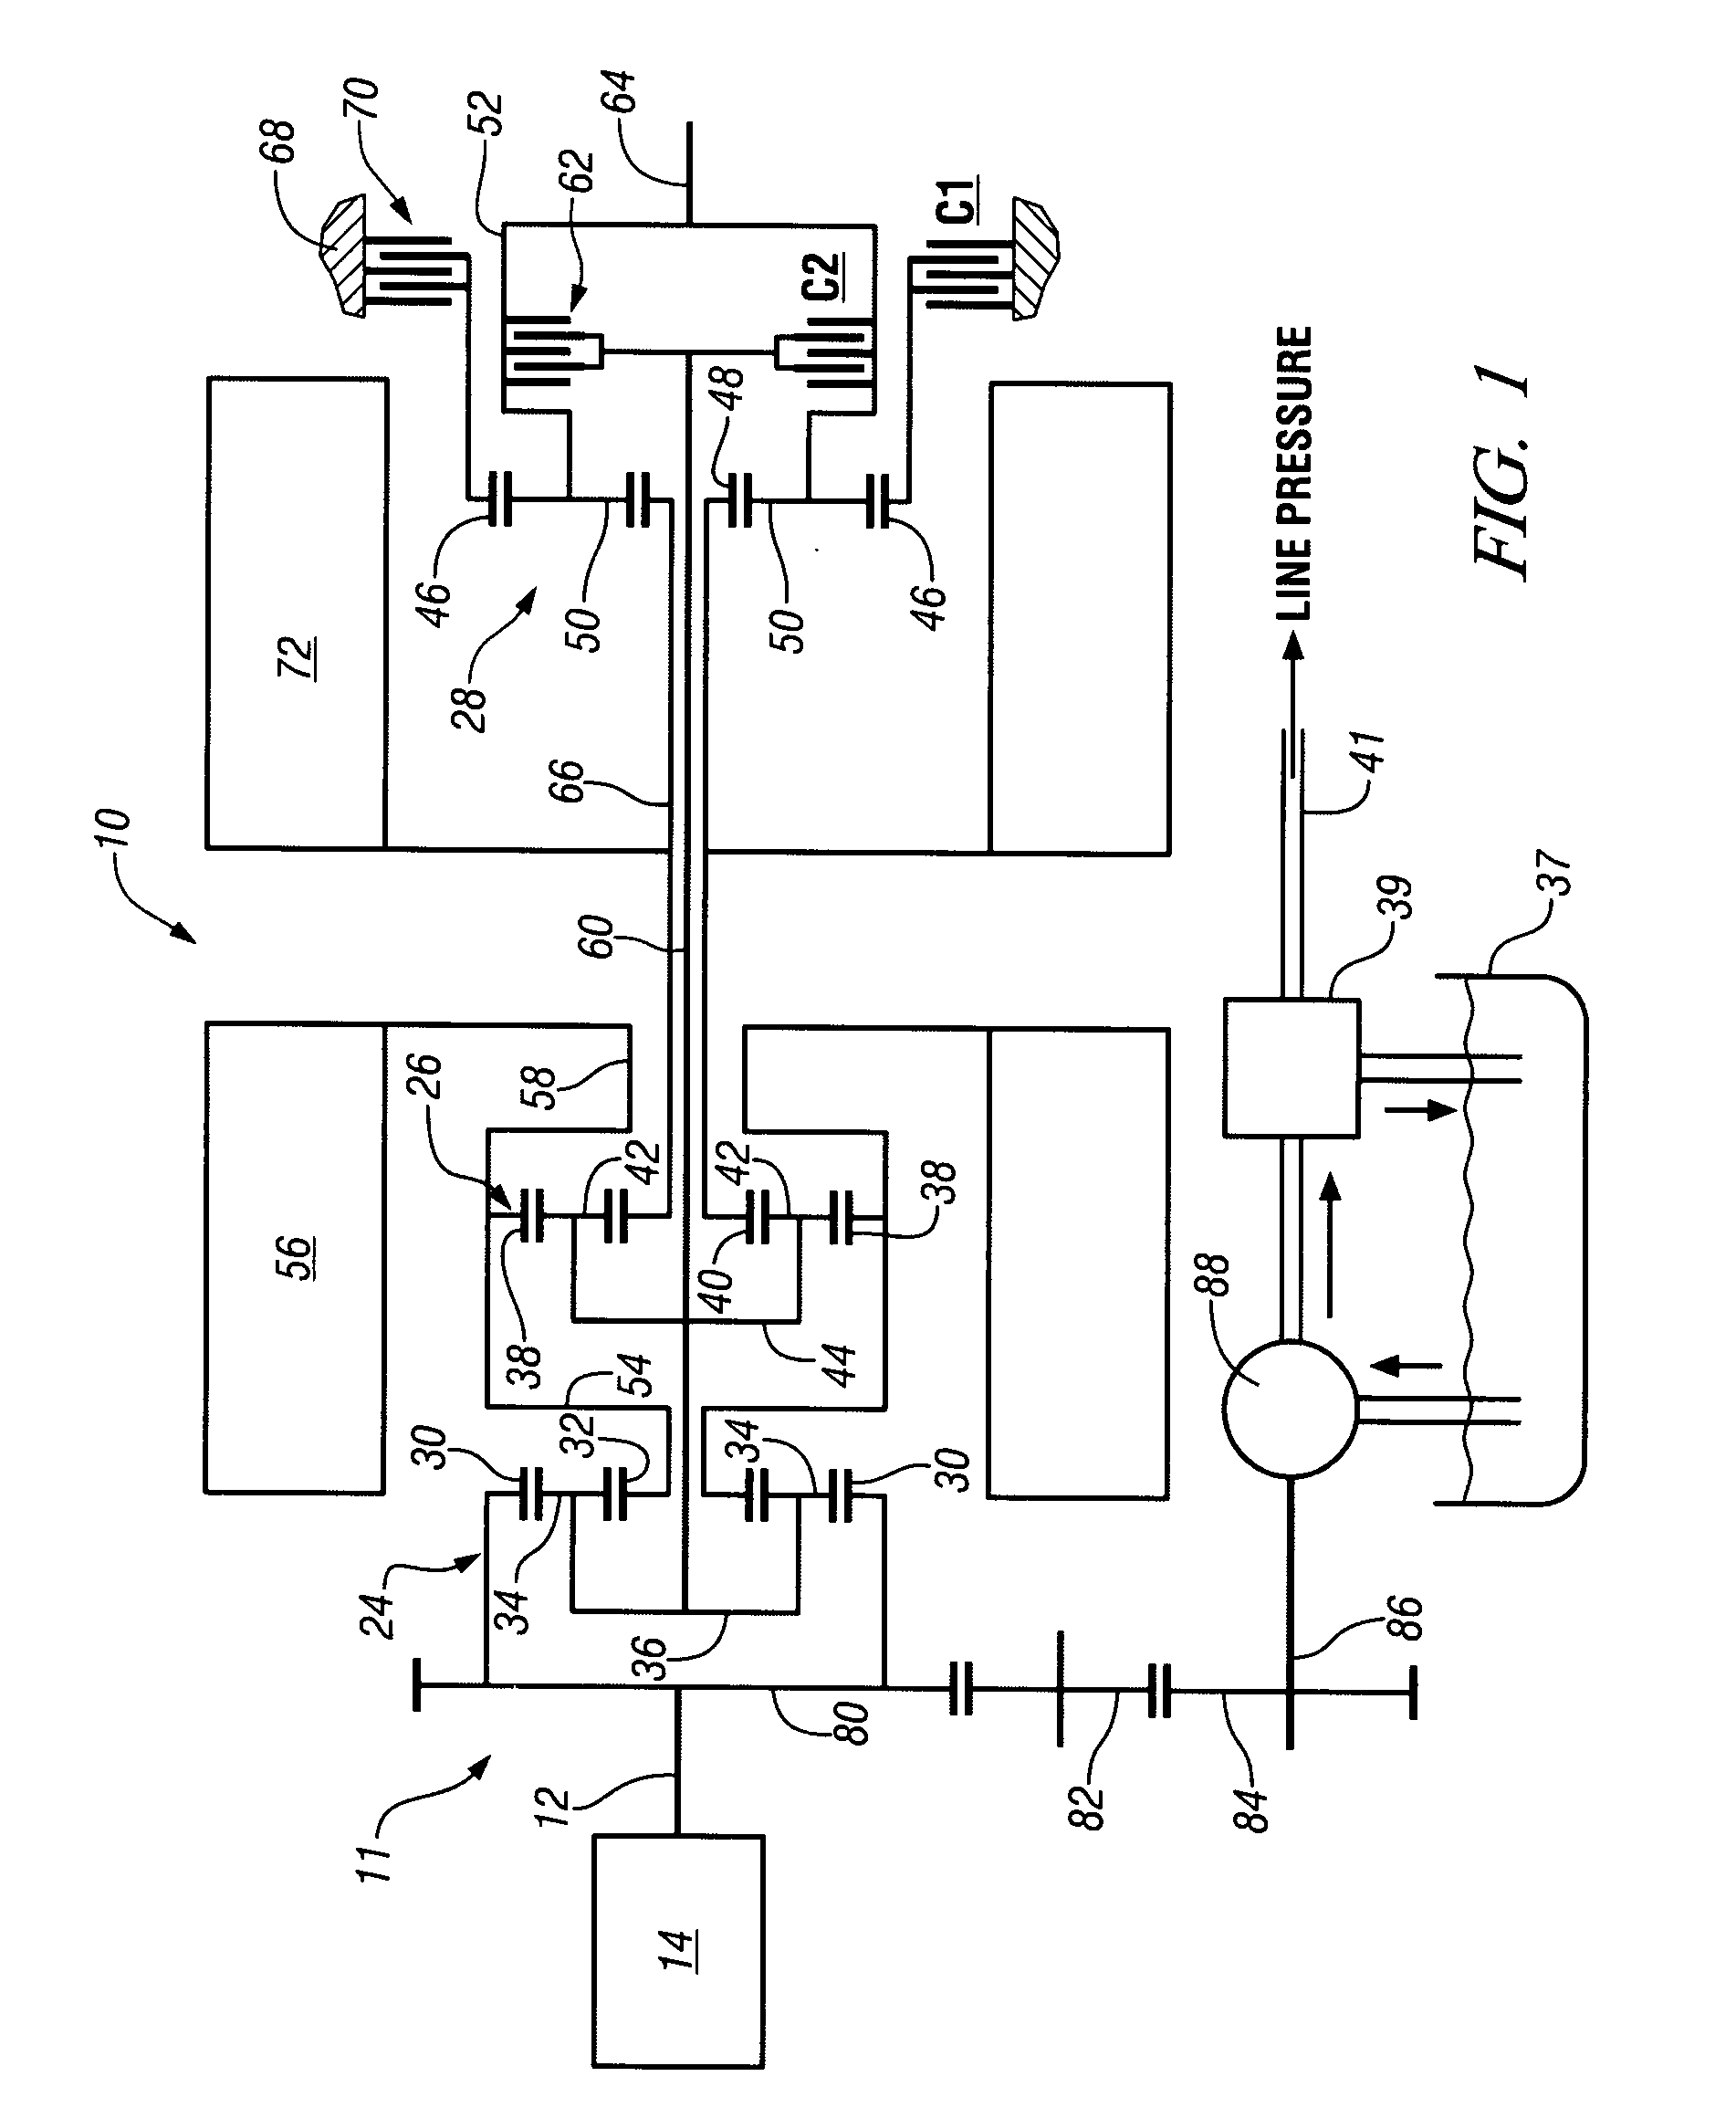 Method for controlling engine speed in a hybrid electric vehicle